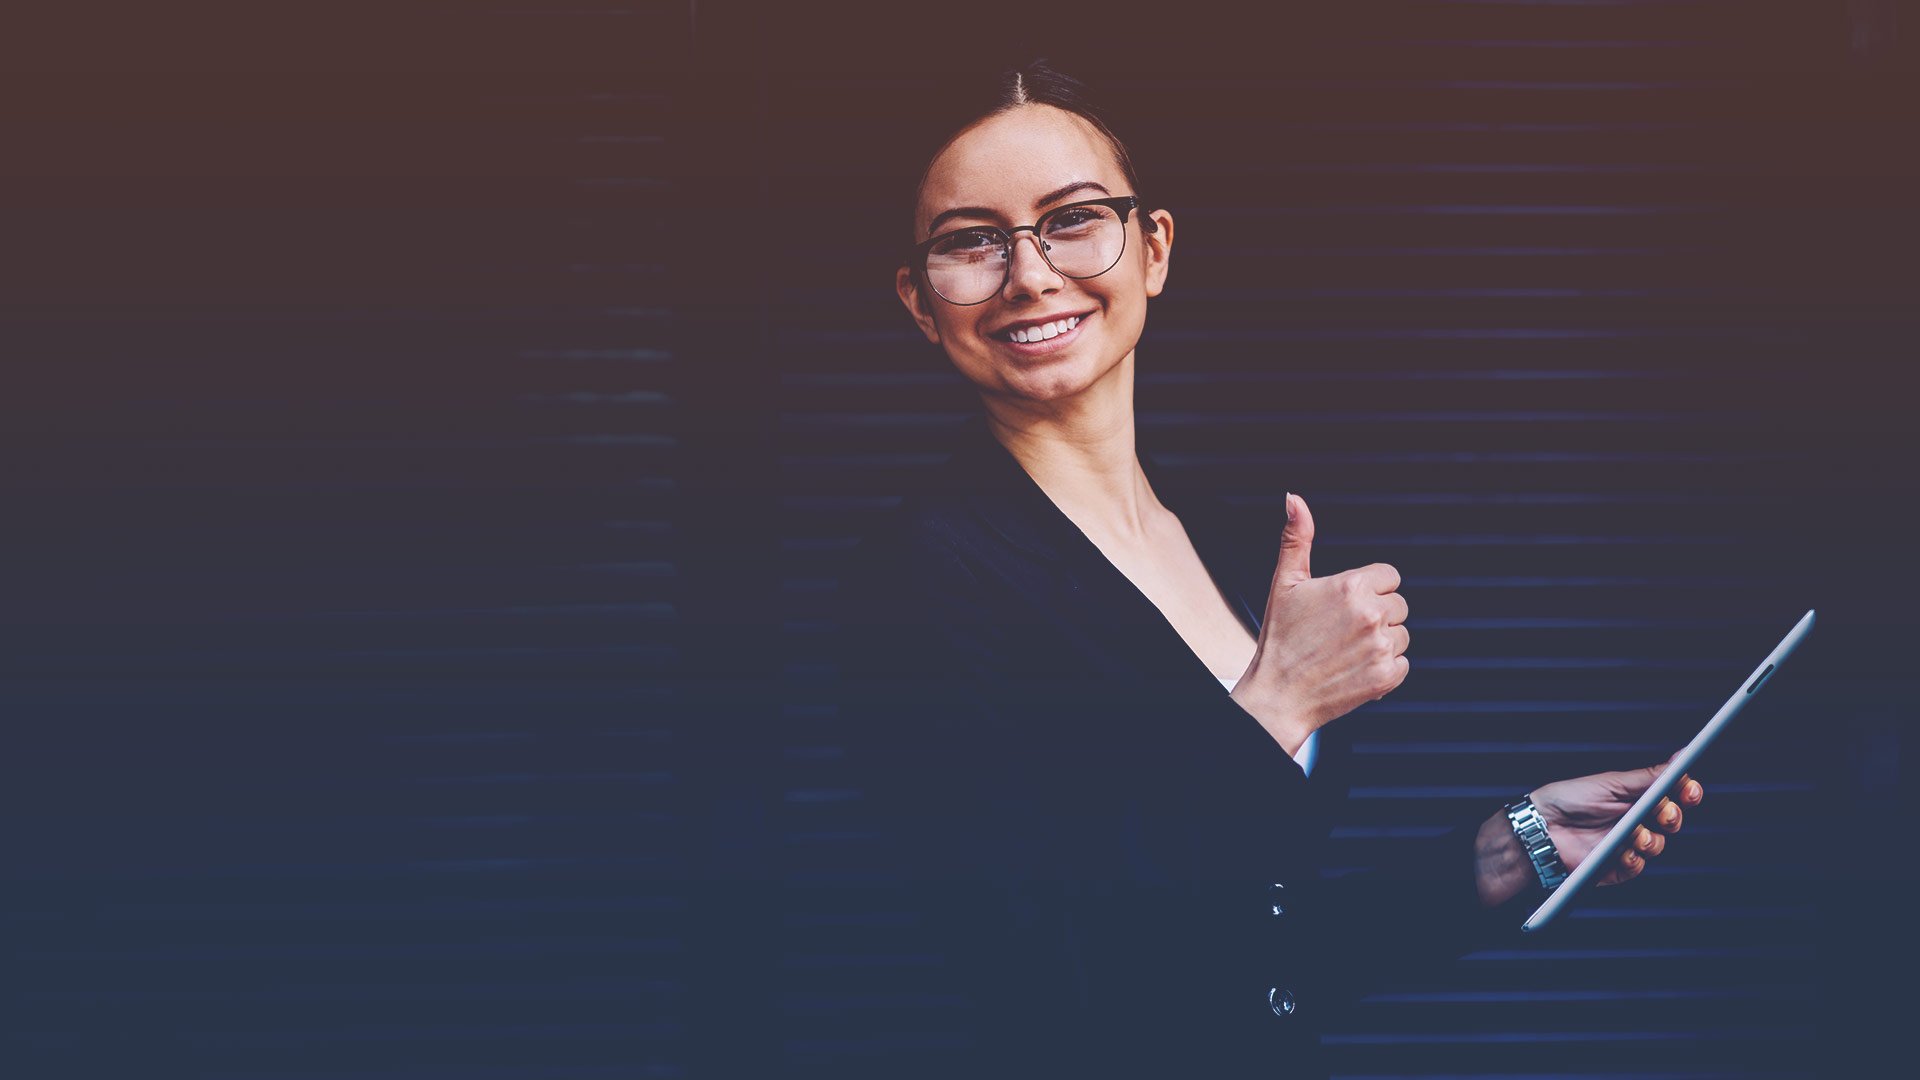 Young professional woman giving a thumbs up signal